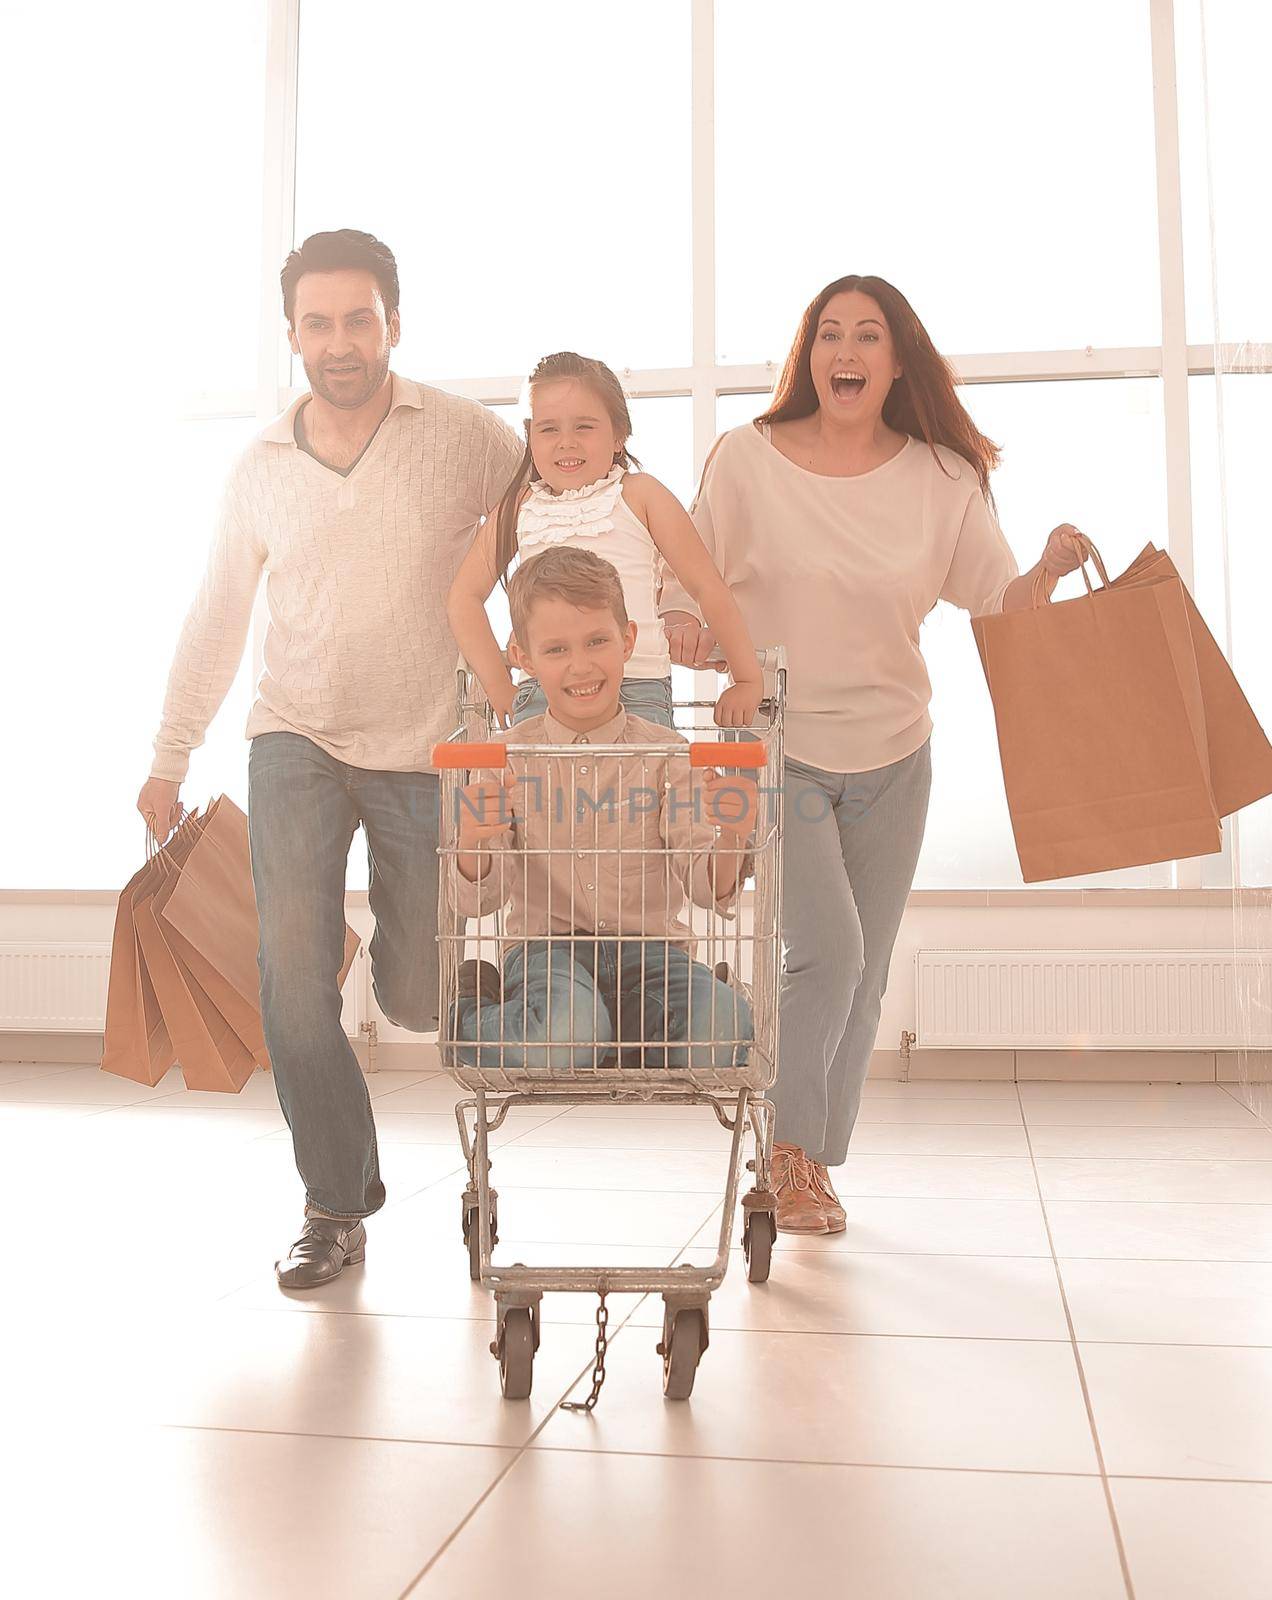 happy family in a hurry to shop by asdf